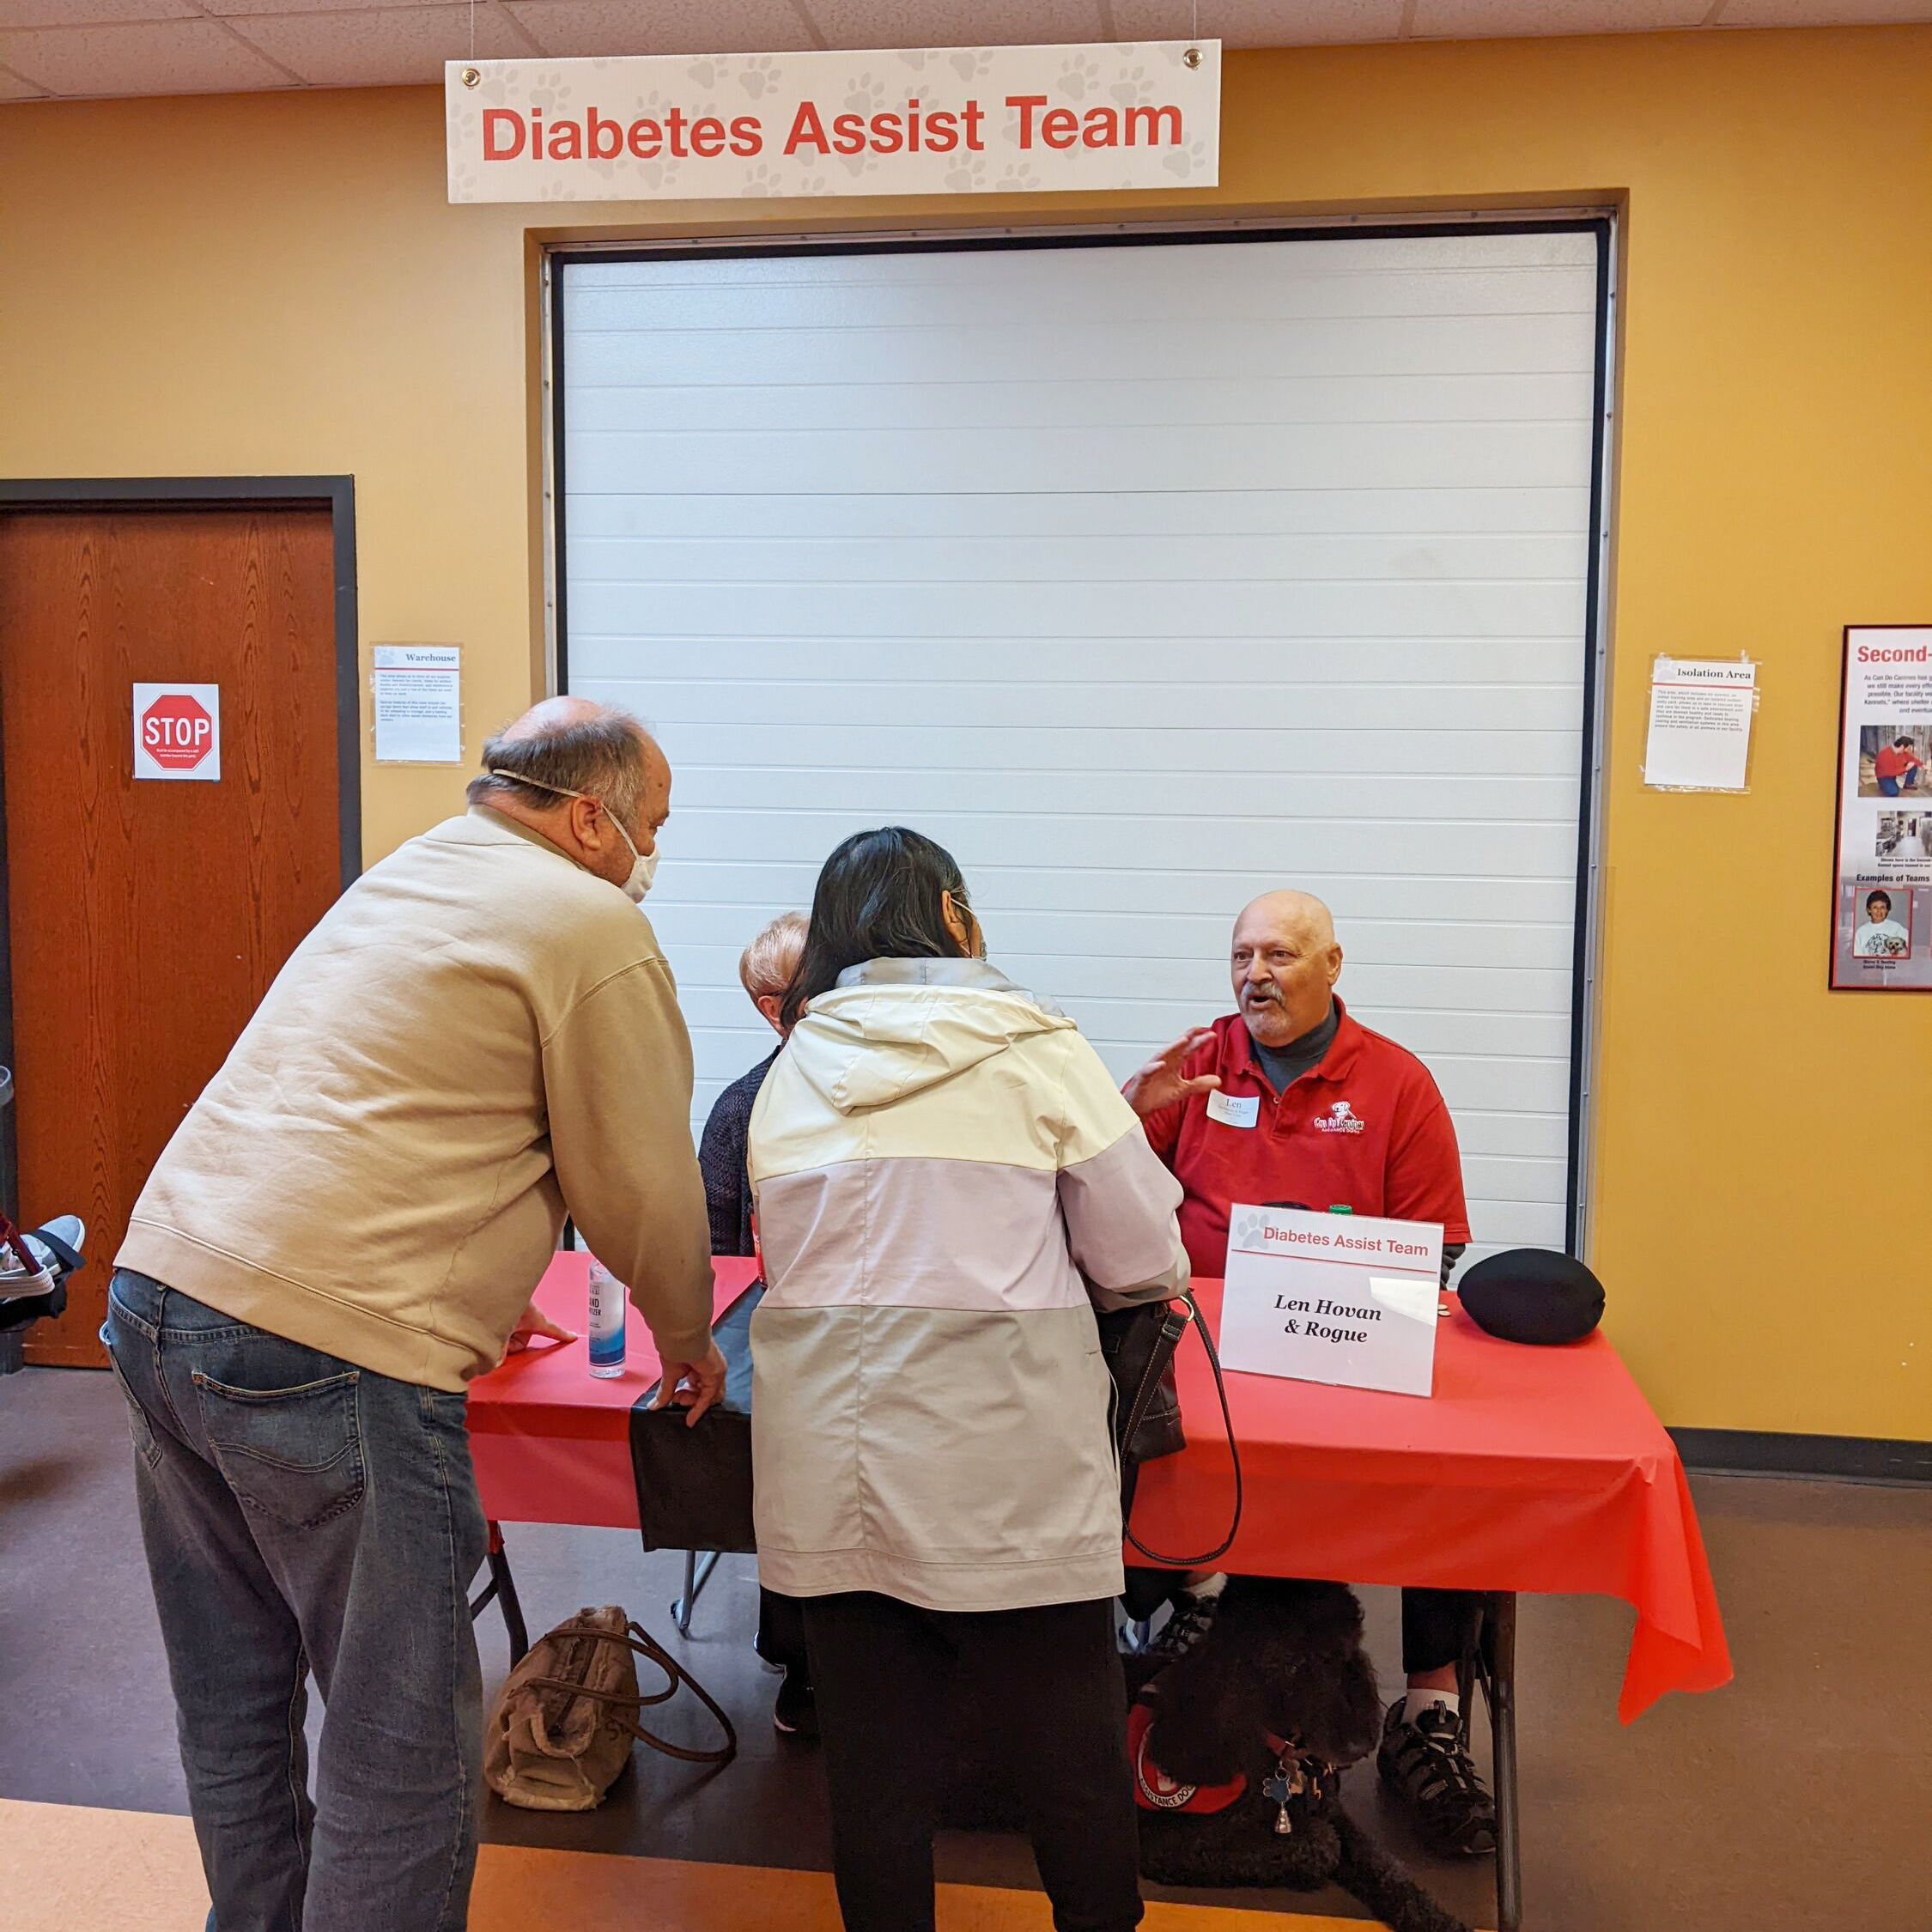 couple talking with man sitting at table under sign saying "Diabetes Assist Team"